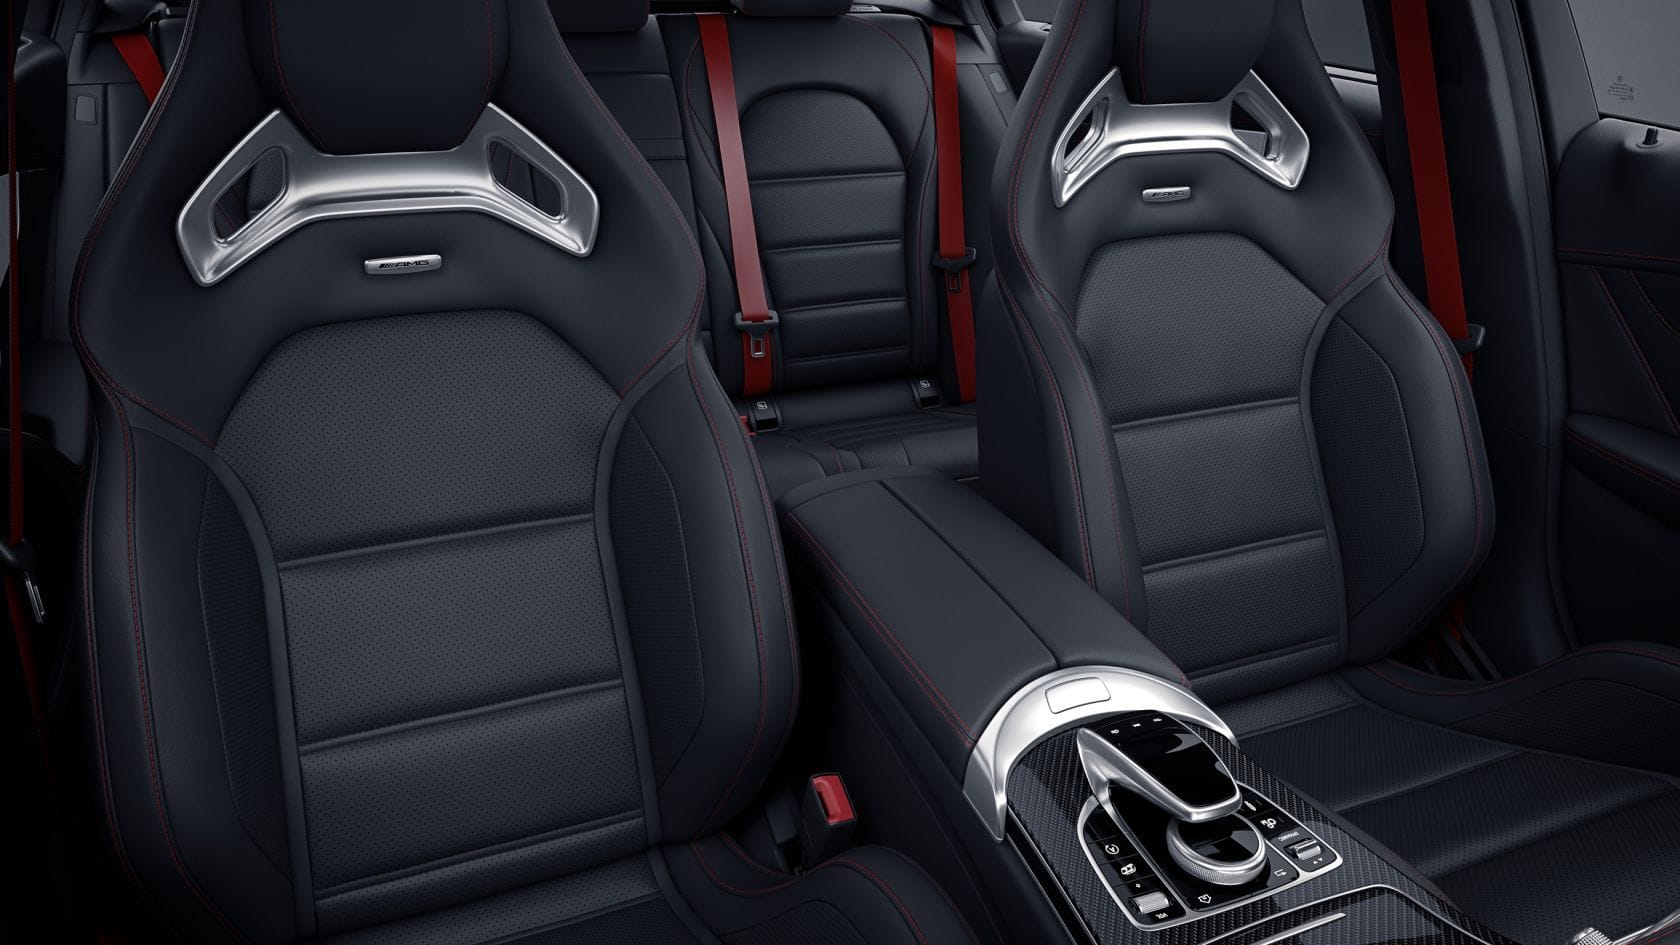 Interior/Upholstery - WTB - AMG Performance Seats for my 2019 C43 - Used - 2019 to 2020 Mercedes-Benz C43 AMG - Centreville, VA 20120, United States